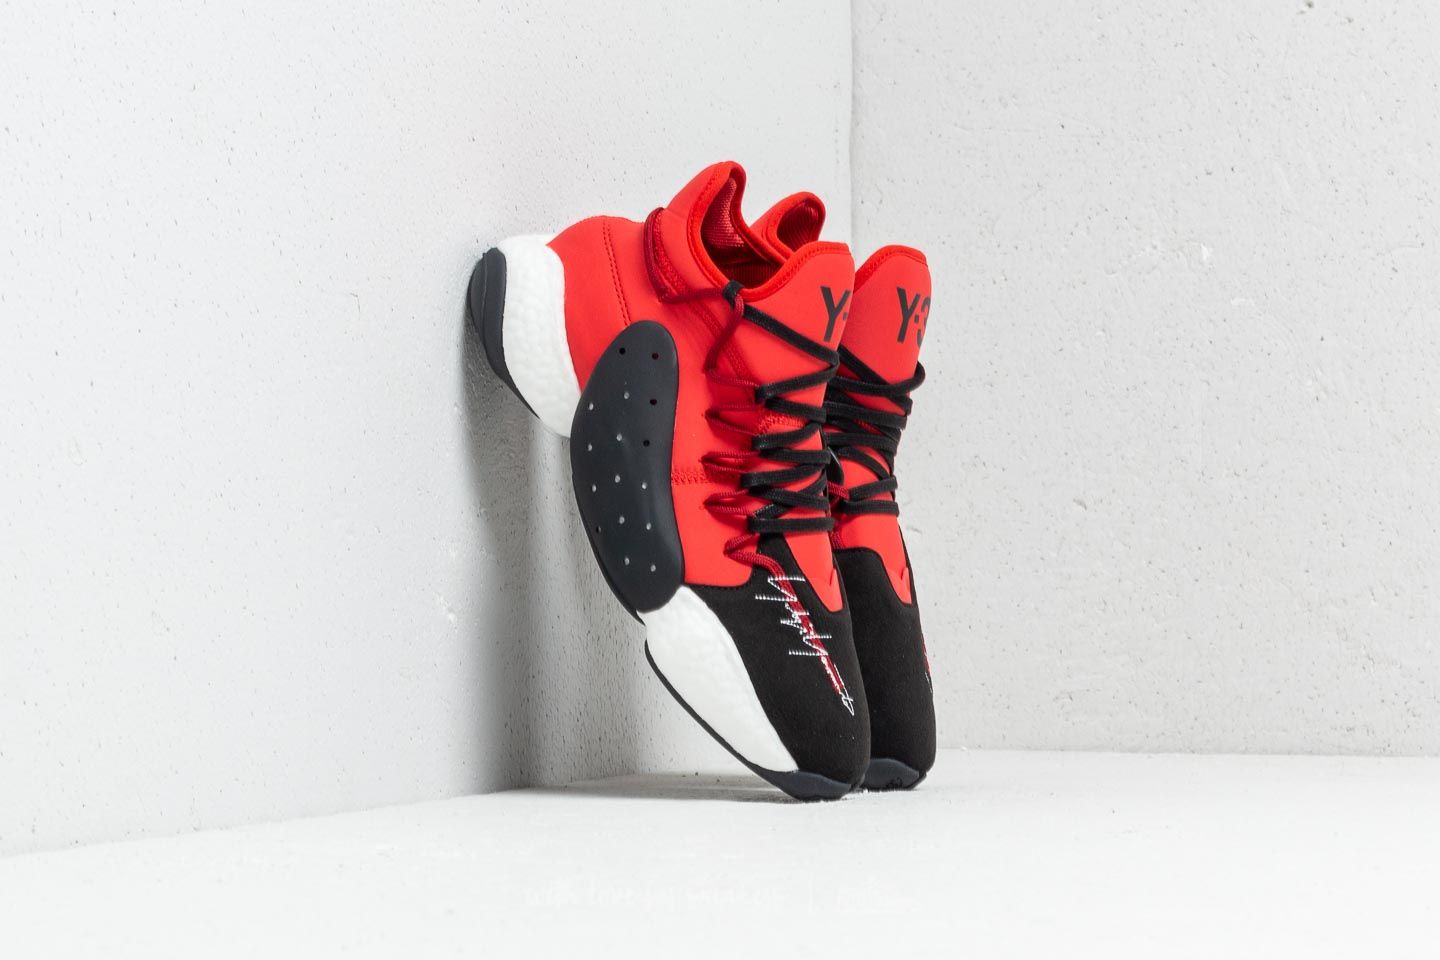 Chaussures et baskets homme Y-3 BYW BBALL Core Black/ Lush Red/ Core White